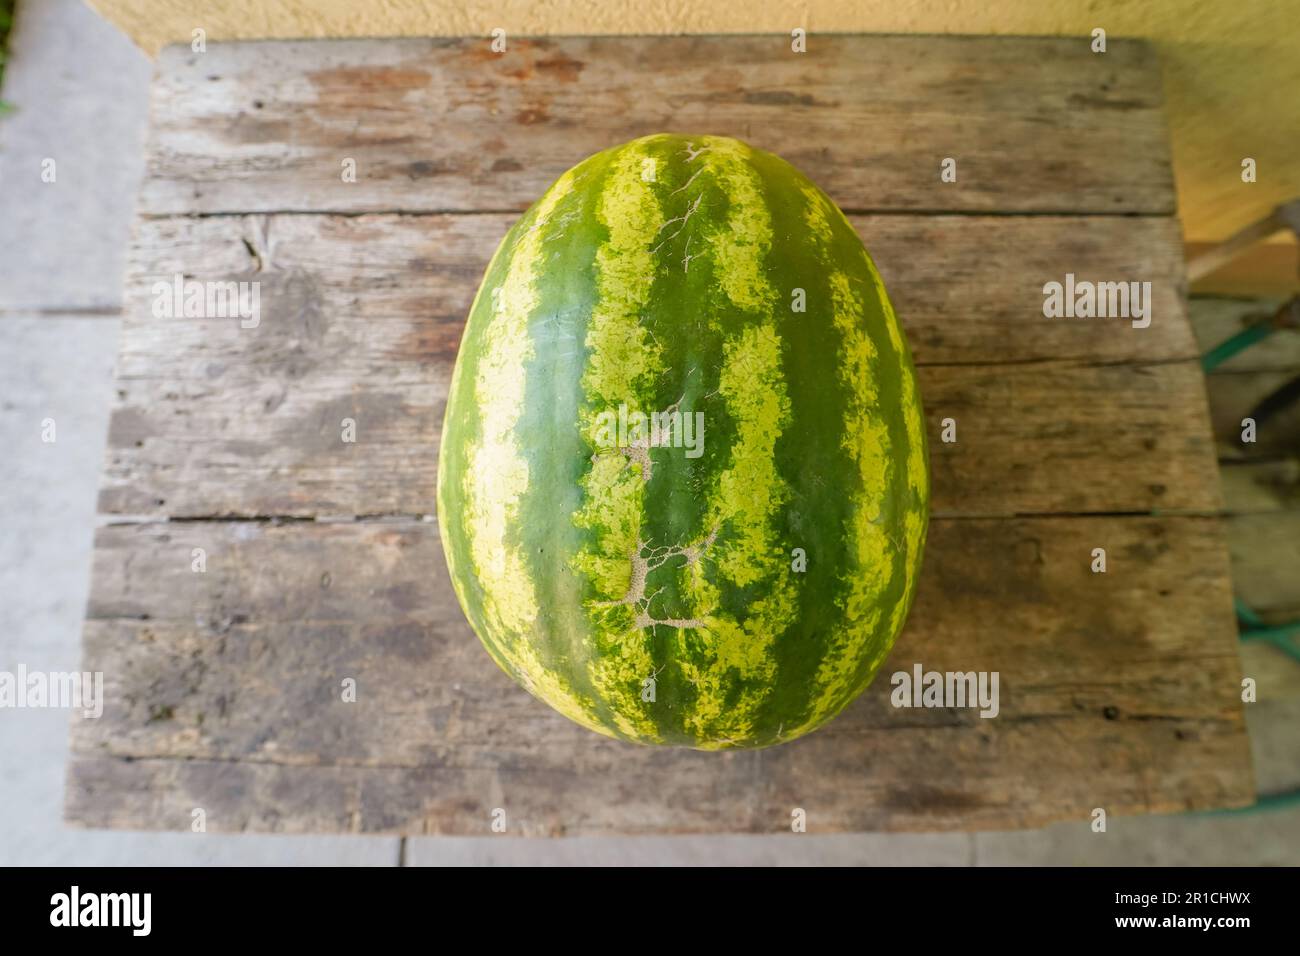 Watermelon Juicy Summer Fun Delight in the Organic Garden on a old farmhouse wooden table Stock Photo